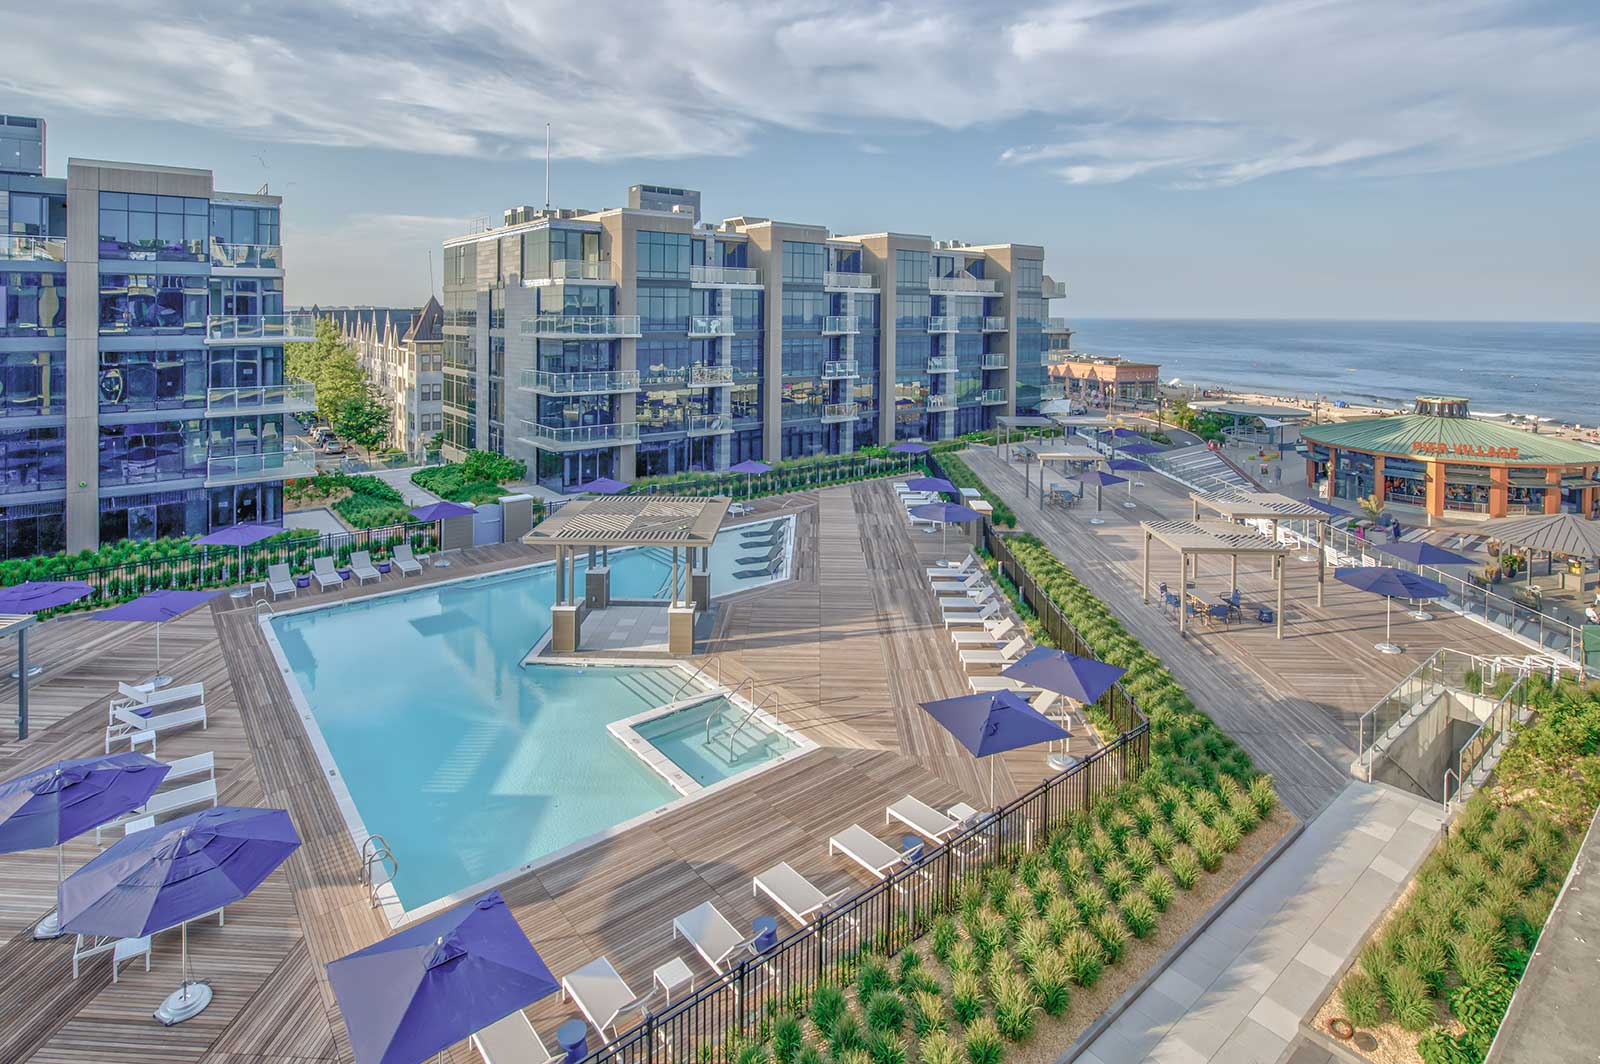 Vacation House in long branch nj, walk to the beach and pier village